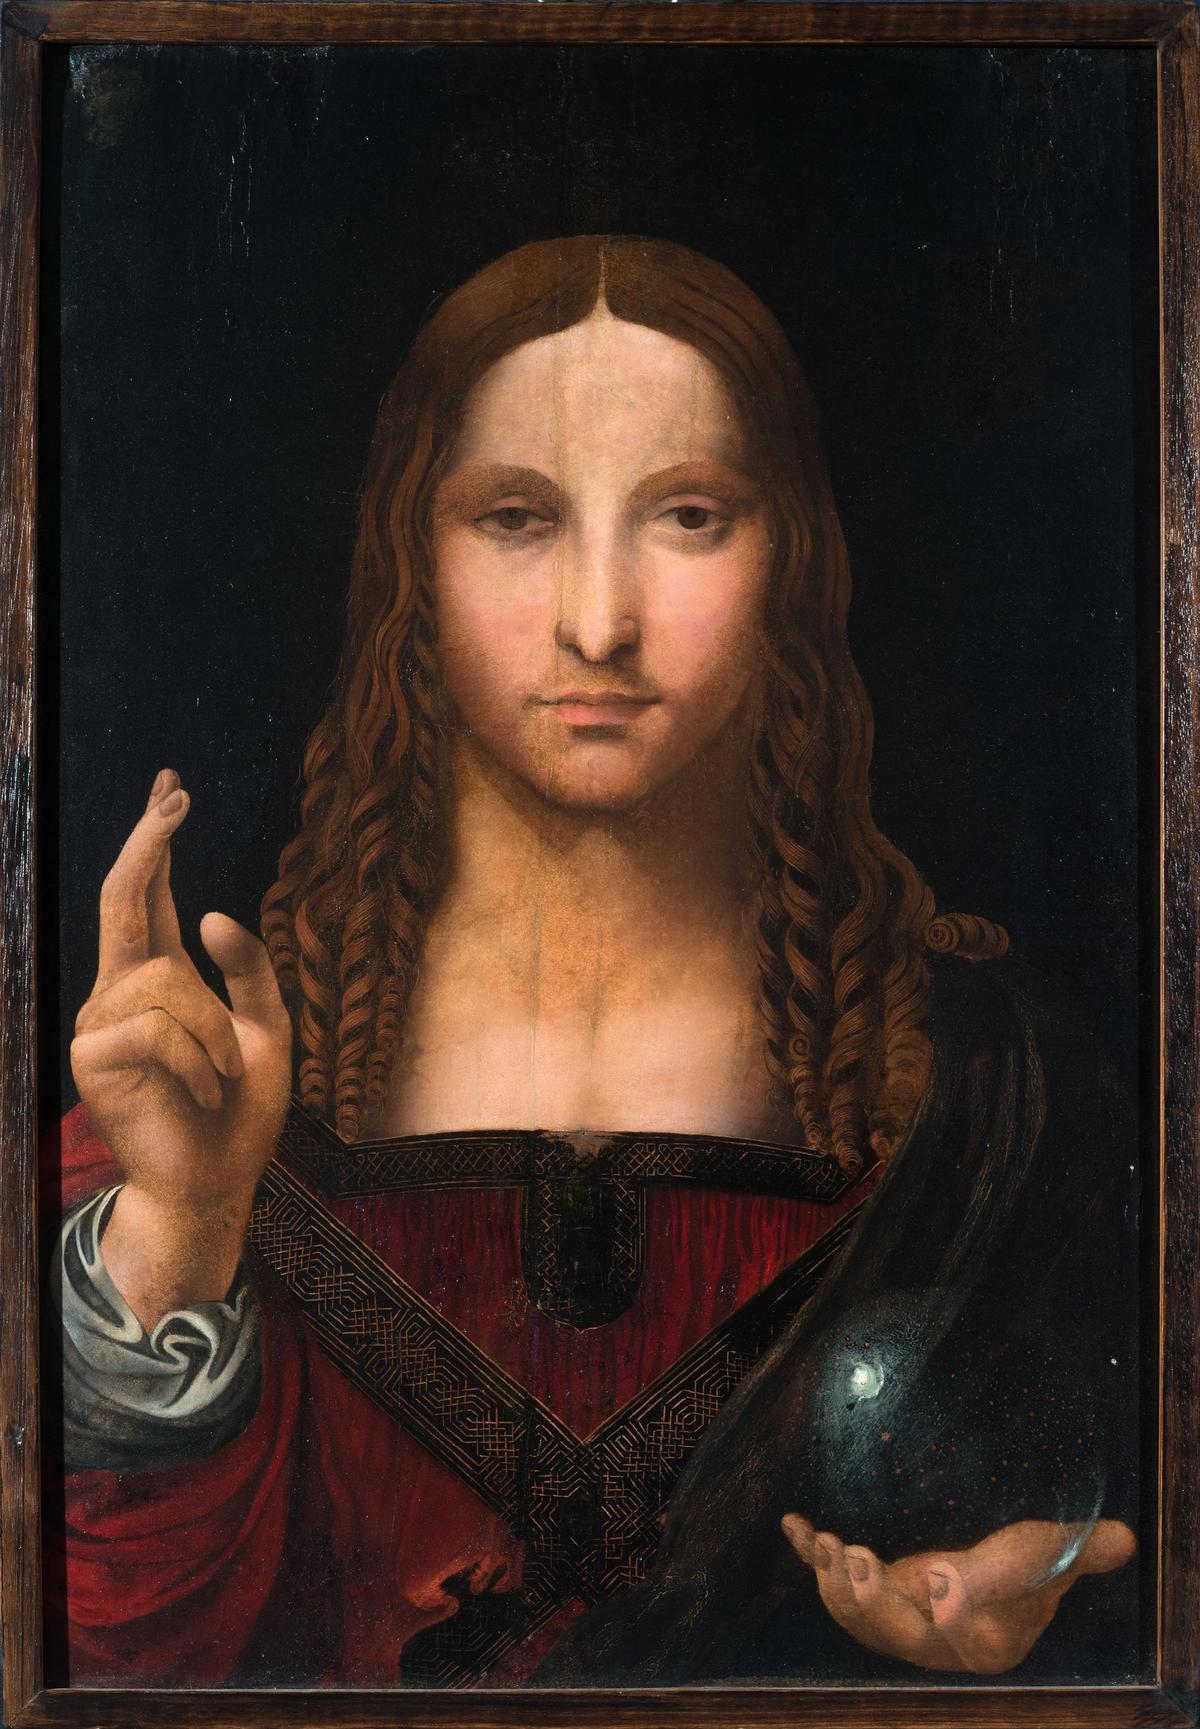 The Naples Salvator Mundi,  attributed to a follower of Leonardo, was stolen from the Museum of San Domenico Maggiore © SAN DOMENICO MAGGIORE, NAPLES